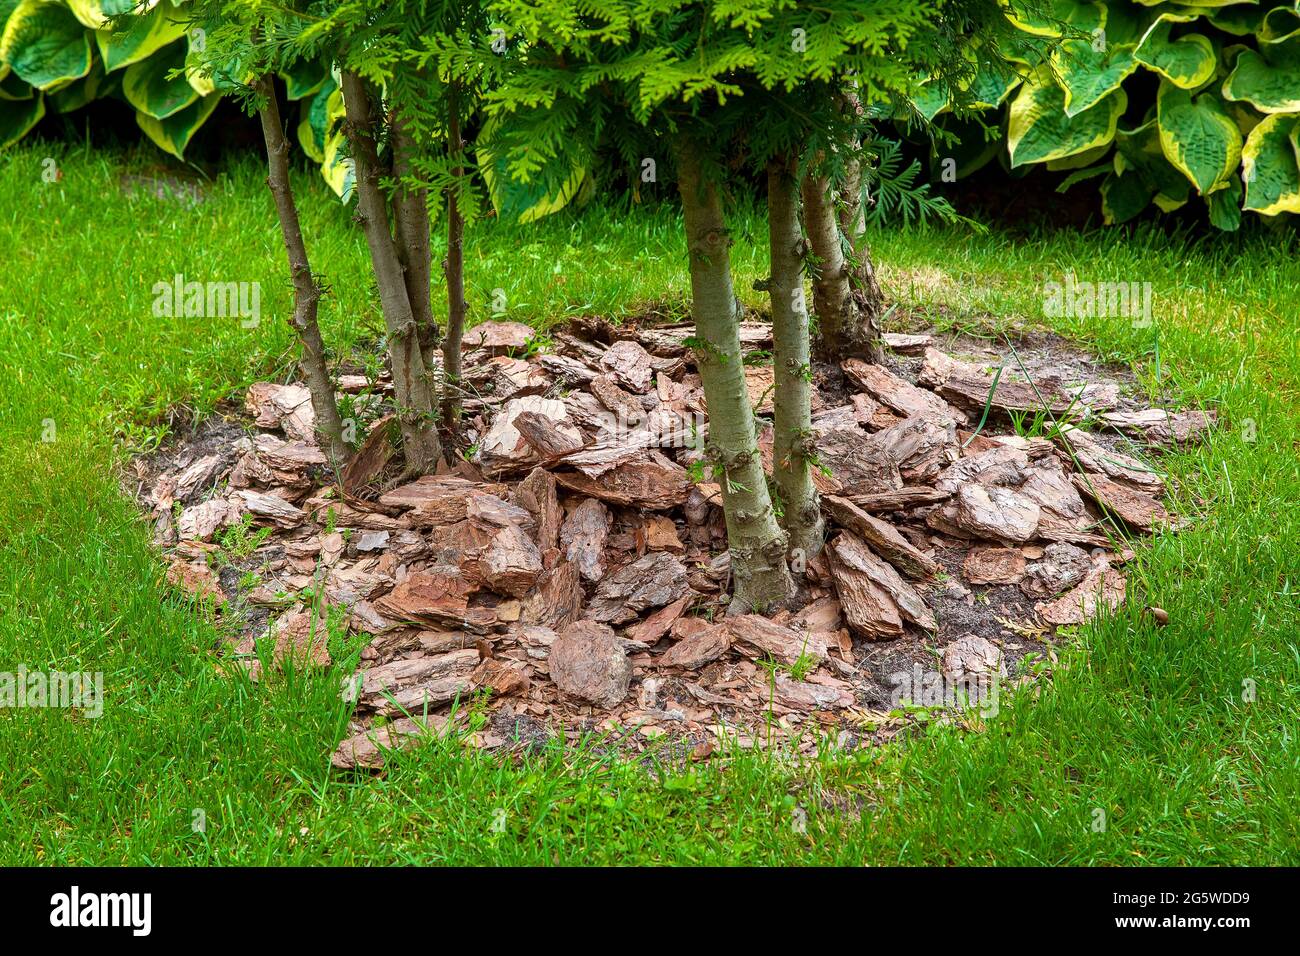 Mulch from the bark of trees around the thuja bushes on green lawn, landscaping of growth backyard garden close-up, nobody. Stock Photo